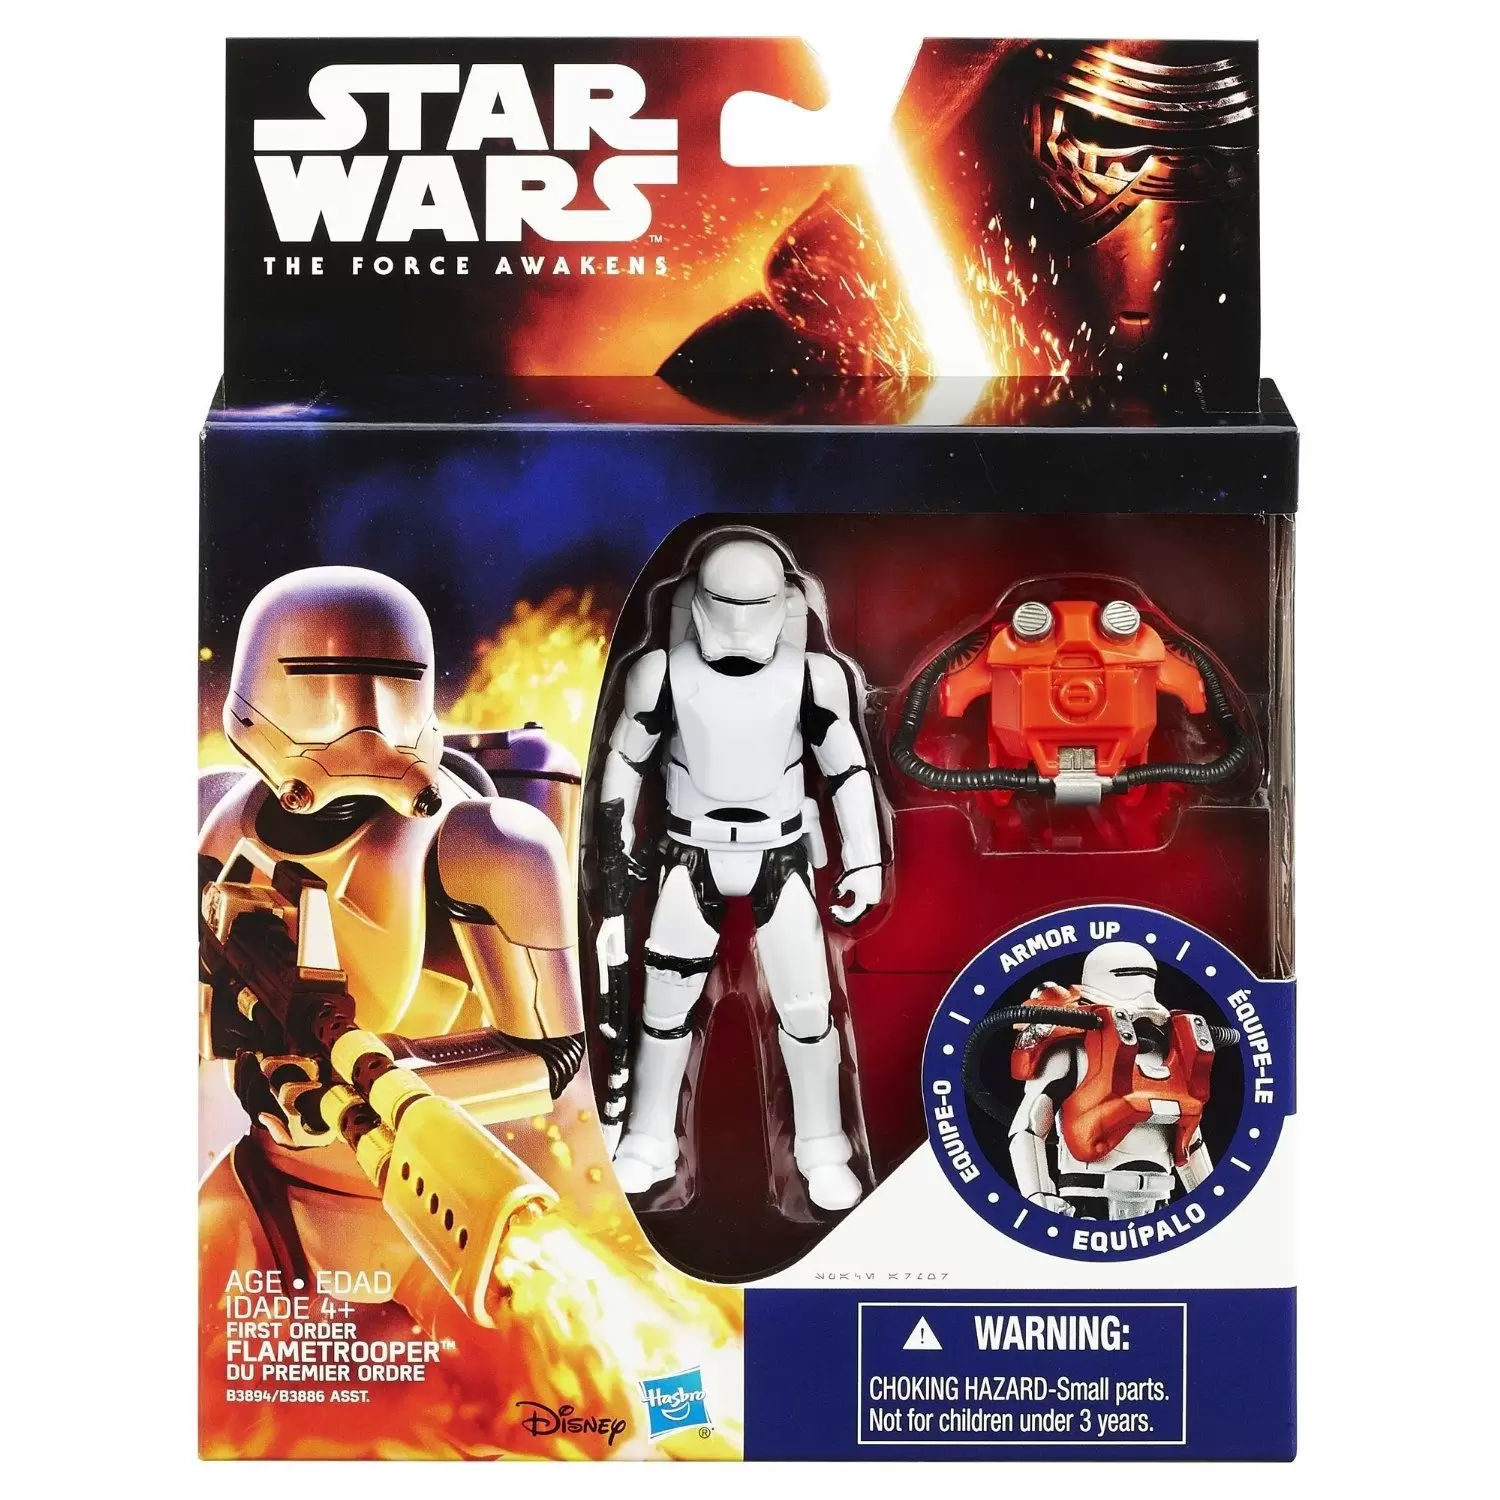 The Force Awakens - First Order Flametrooper